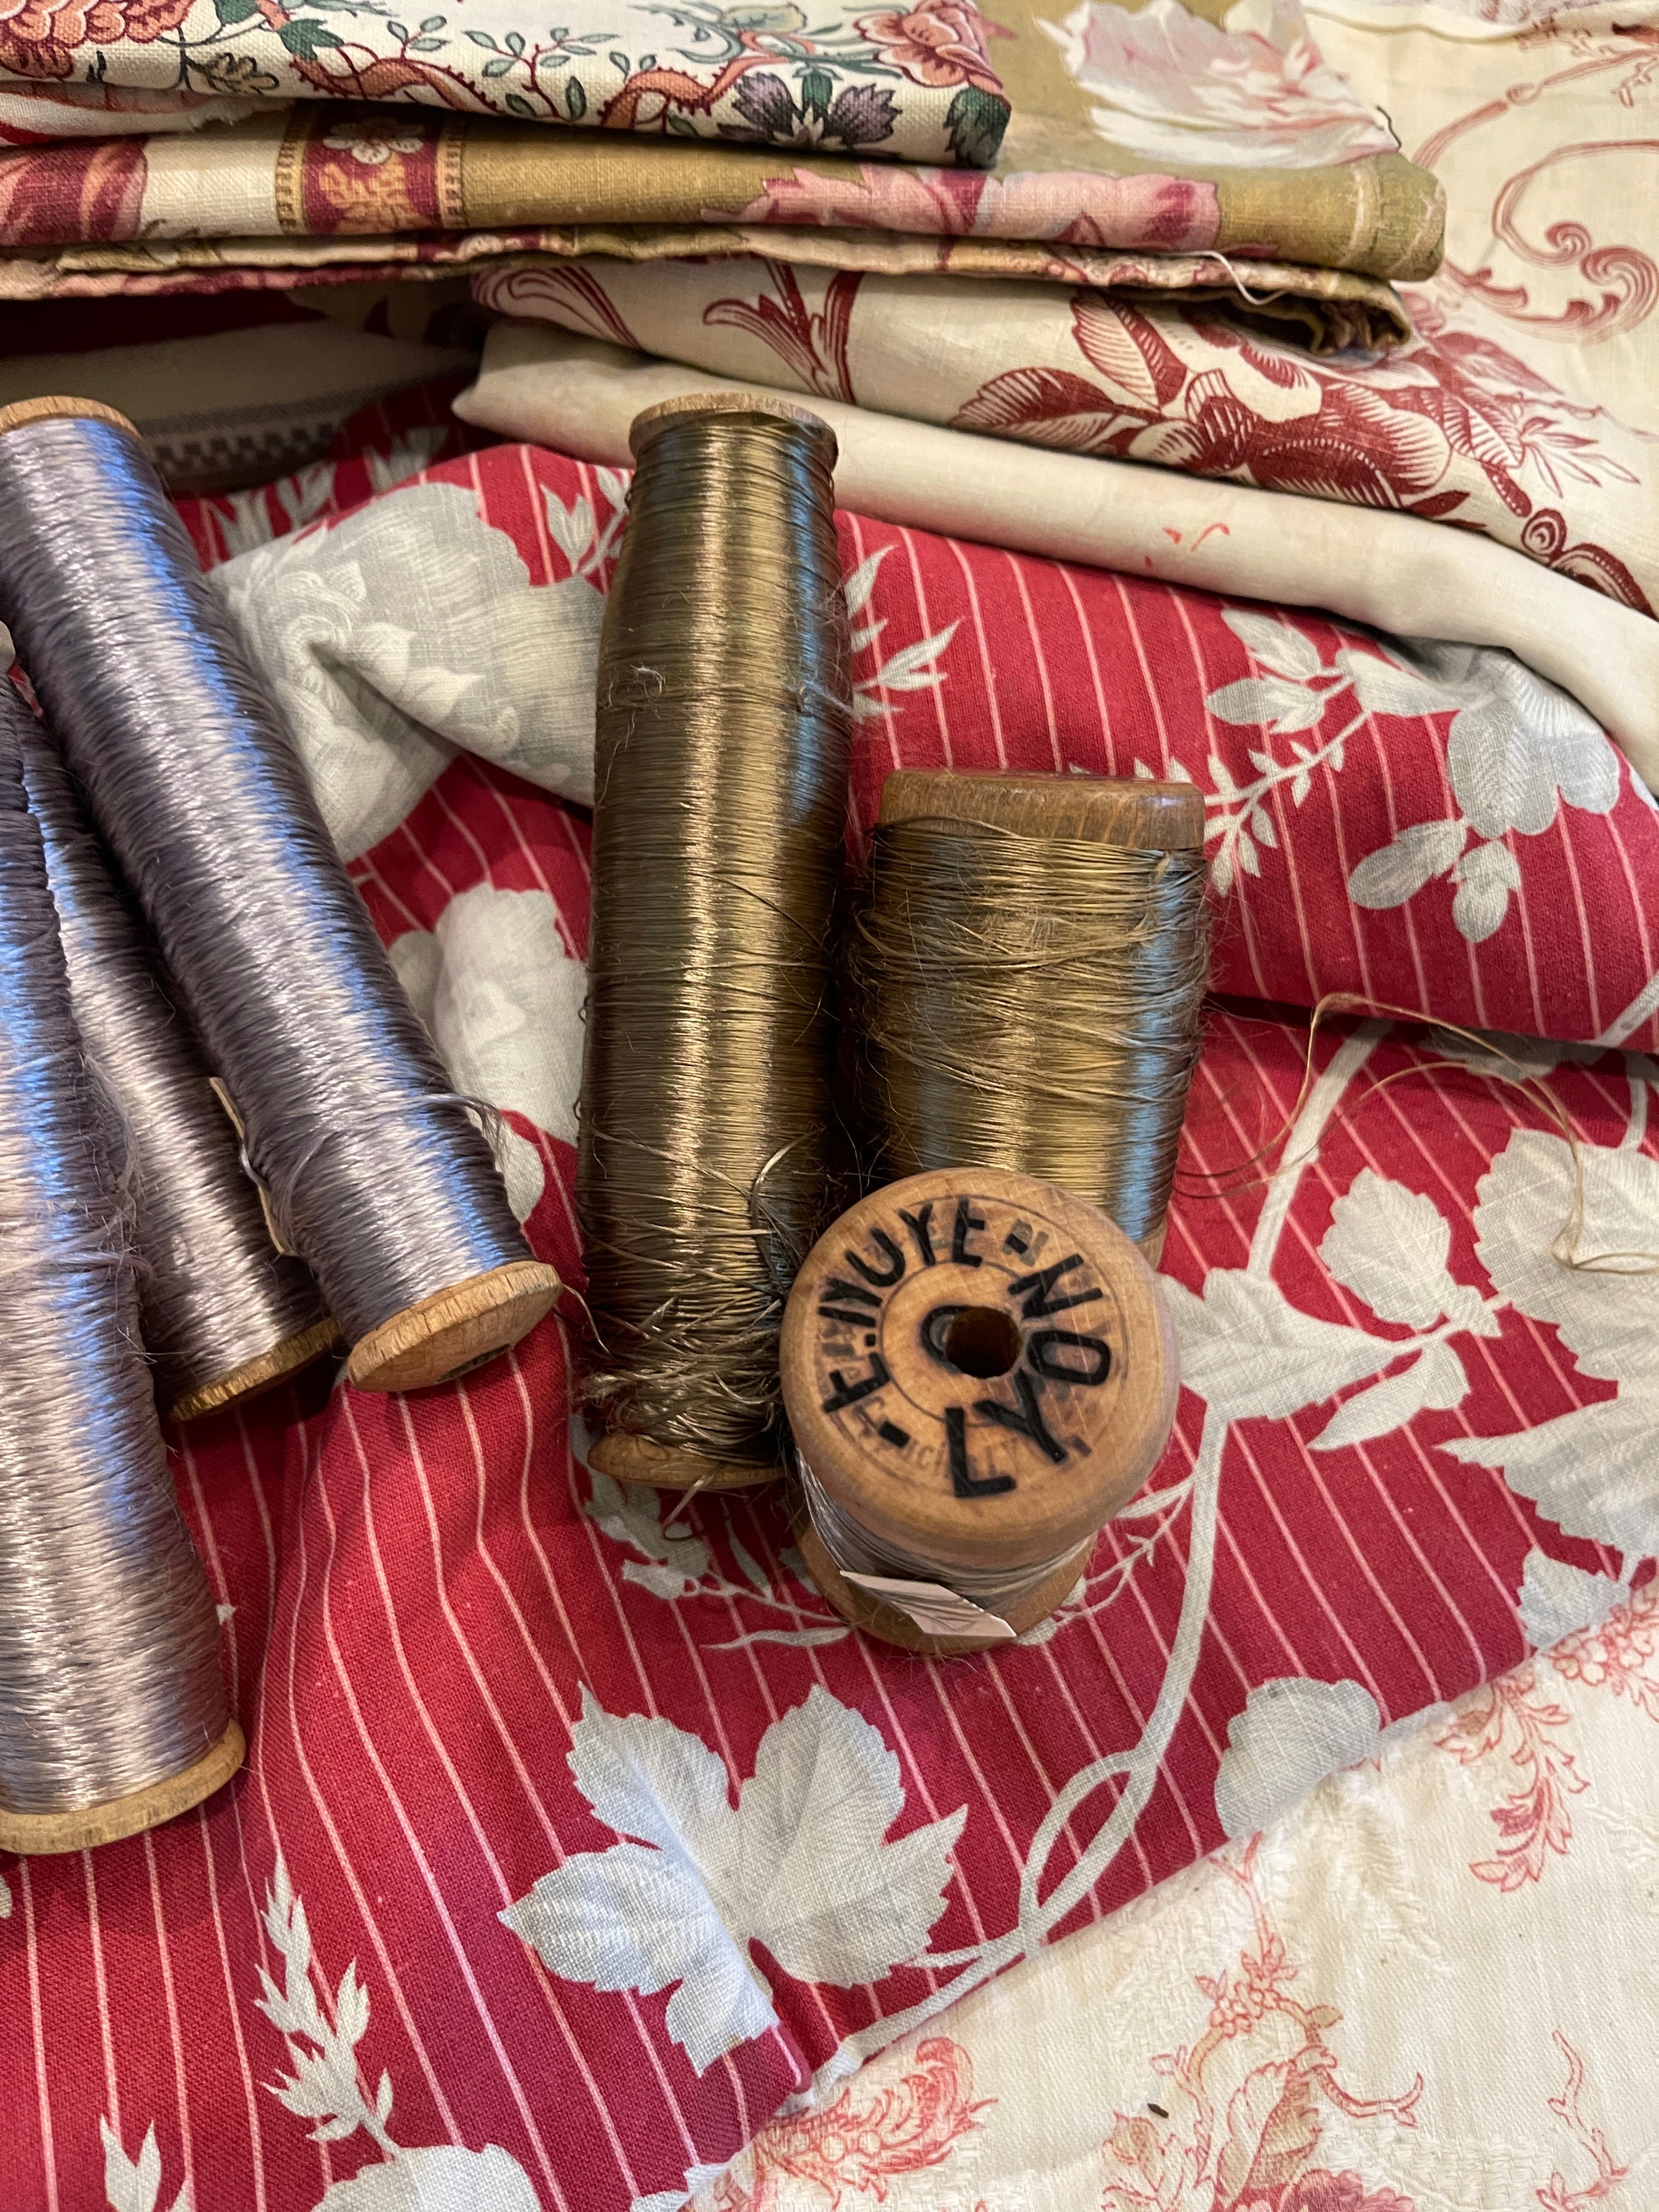 Antique French Silk Thread on Wooden Spools